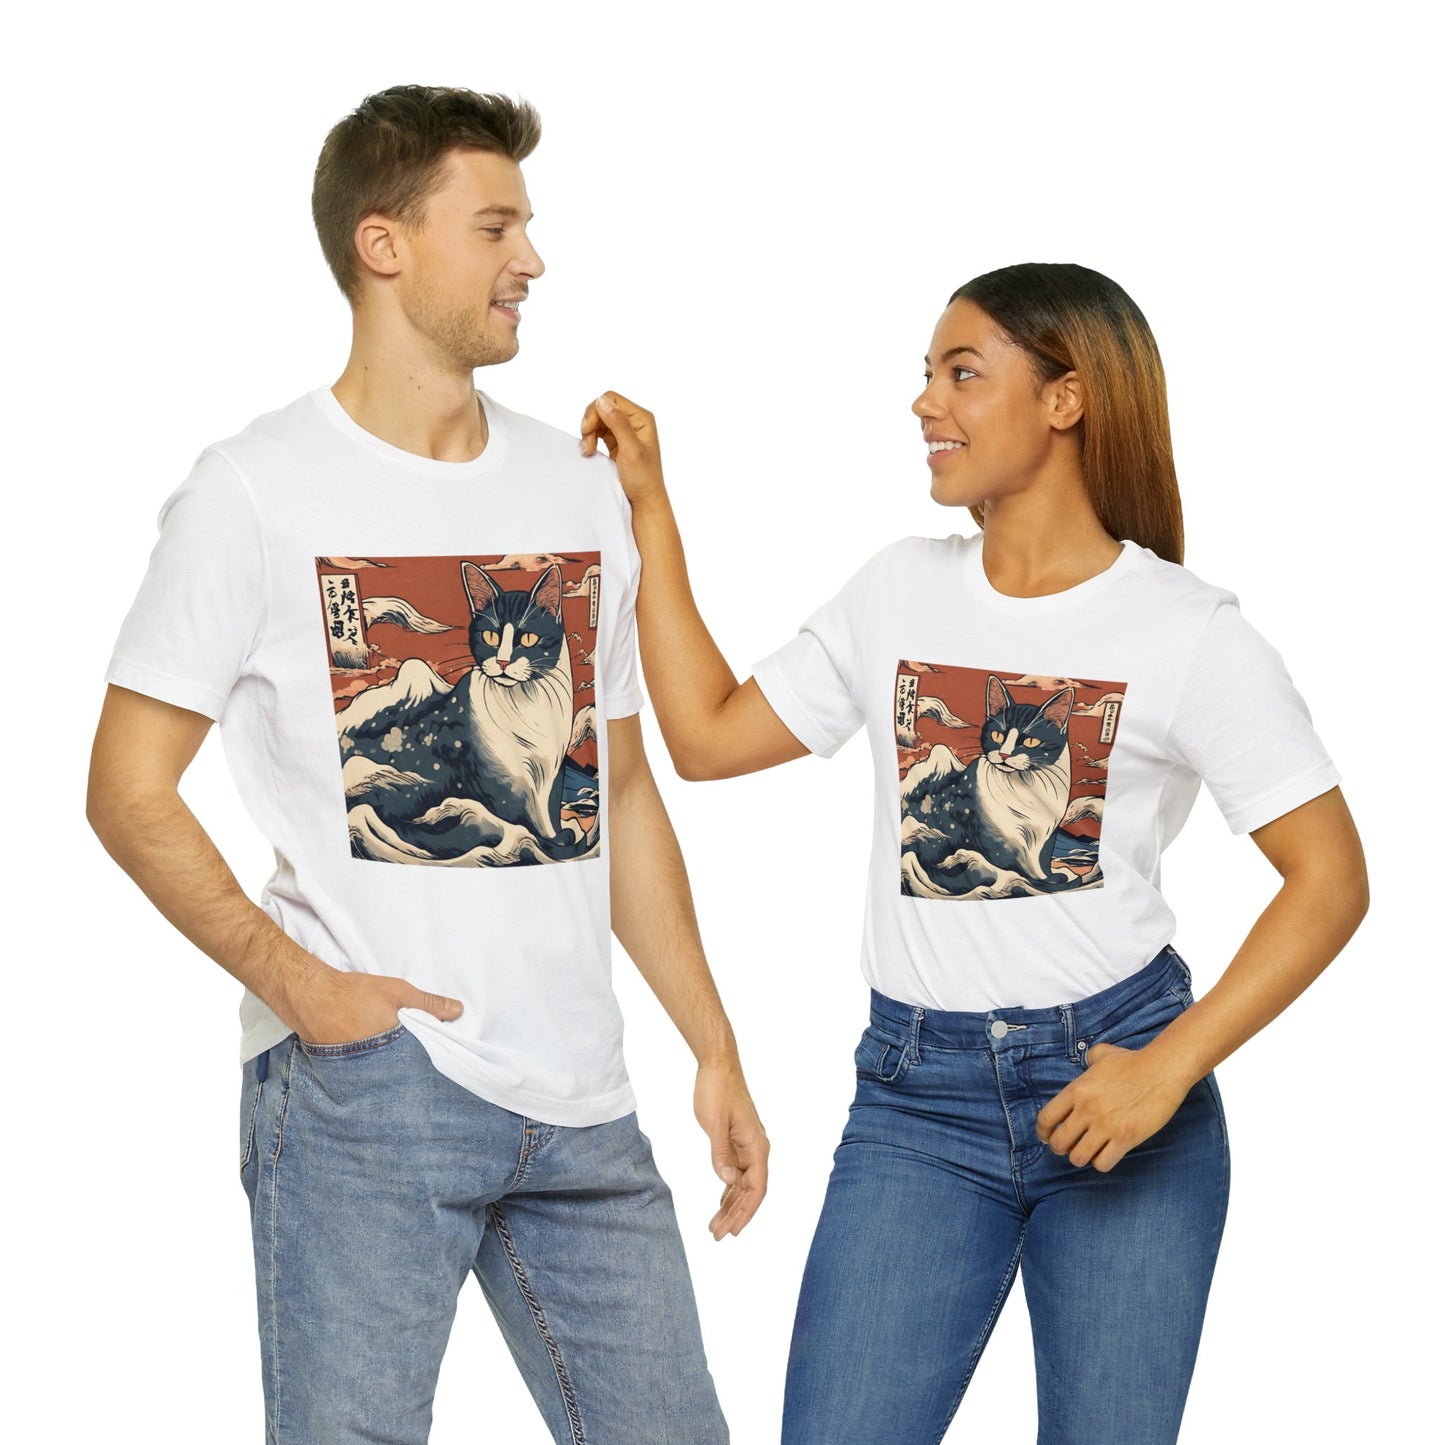 The Great Wave Cat T-shirt